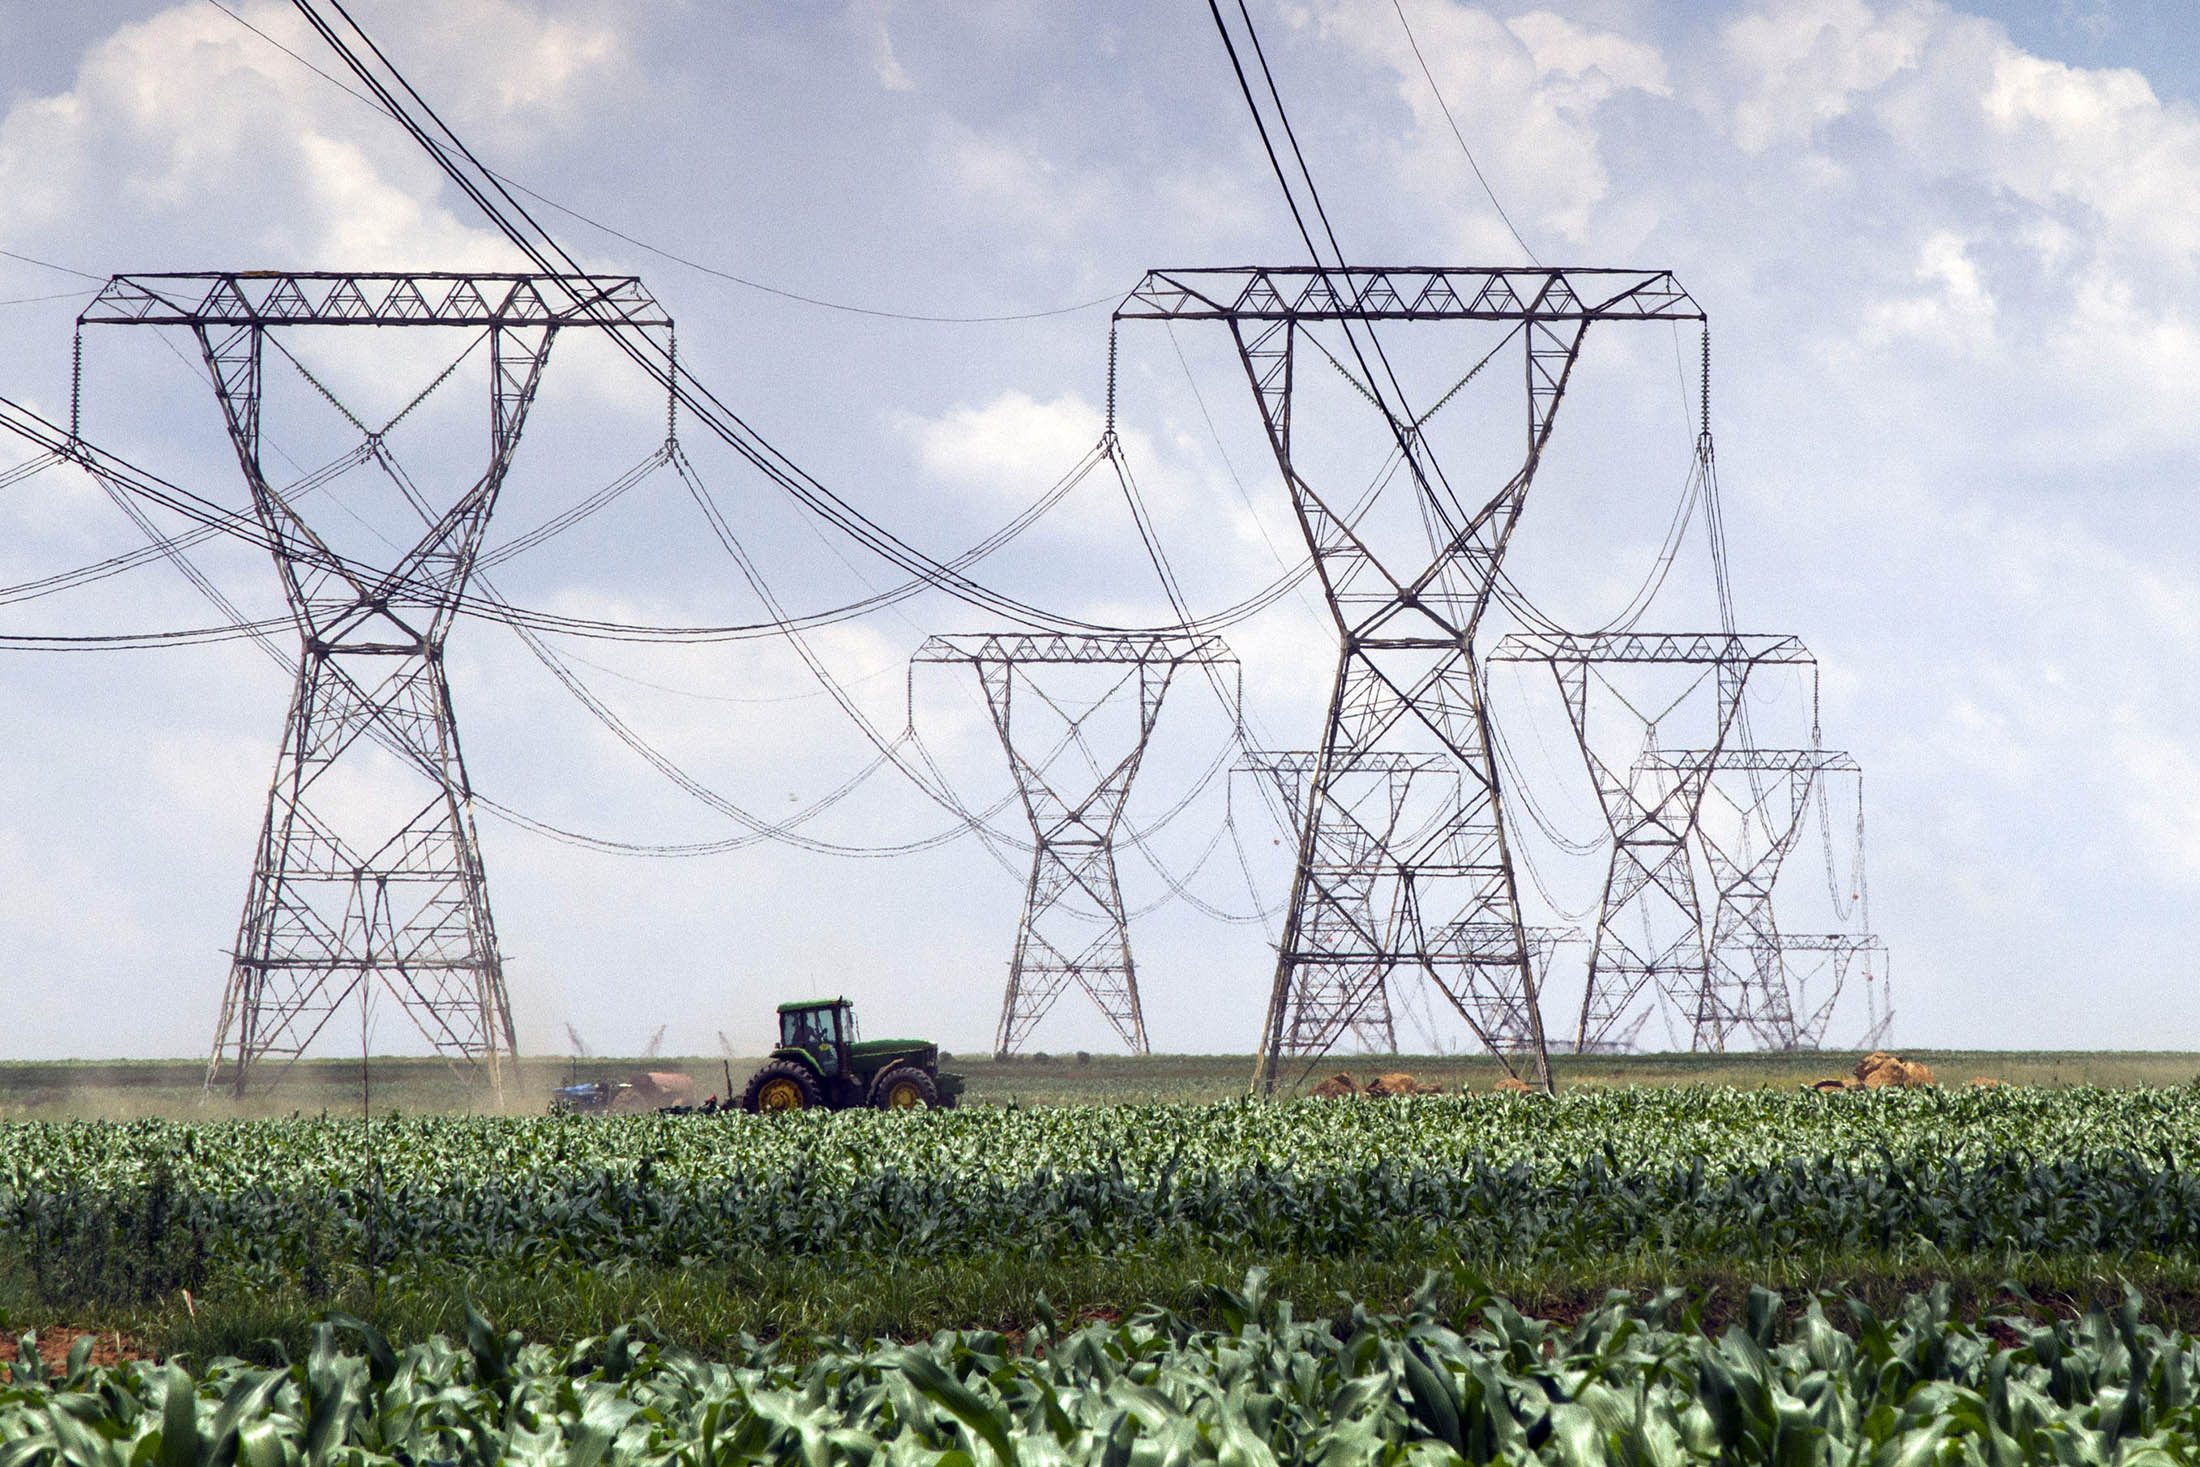 Electricity power lines are seen above a field of maize in Delmas, South Africa.
